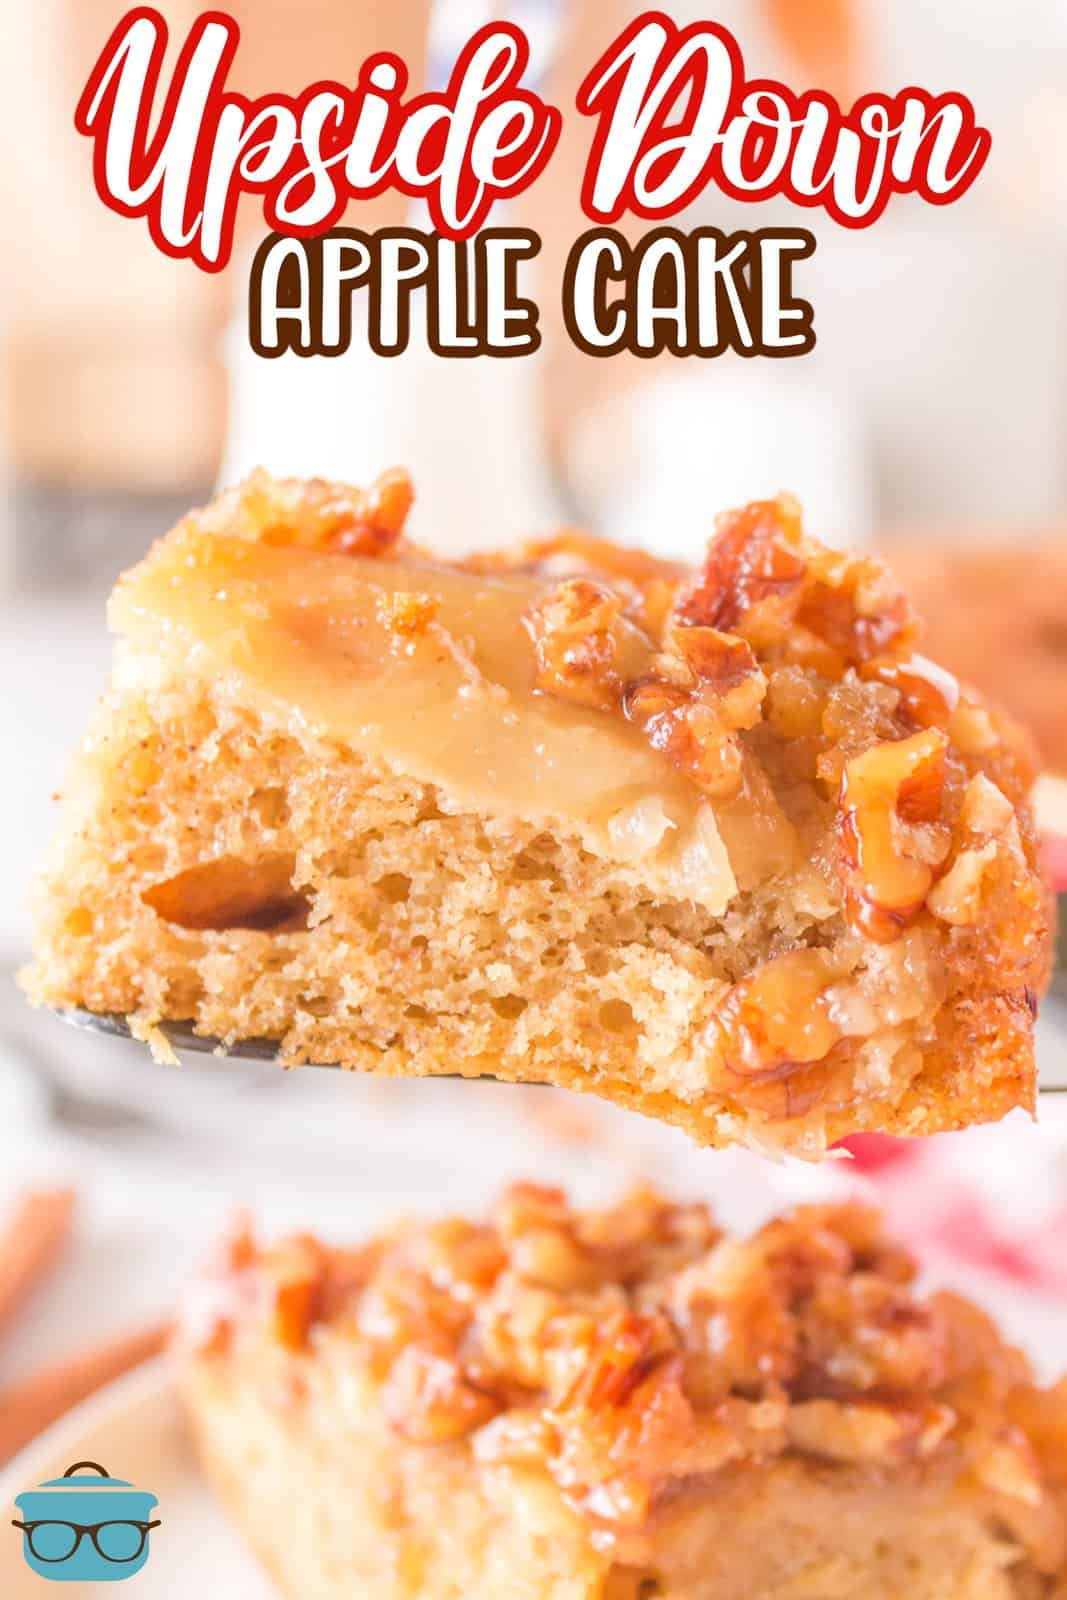 Pinterest image close up of a slice of the Upside Down Apple Cake being held up by cake server.